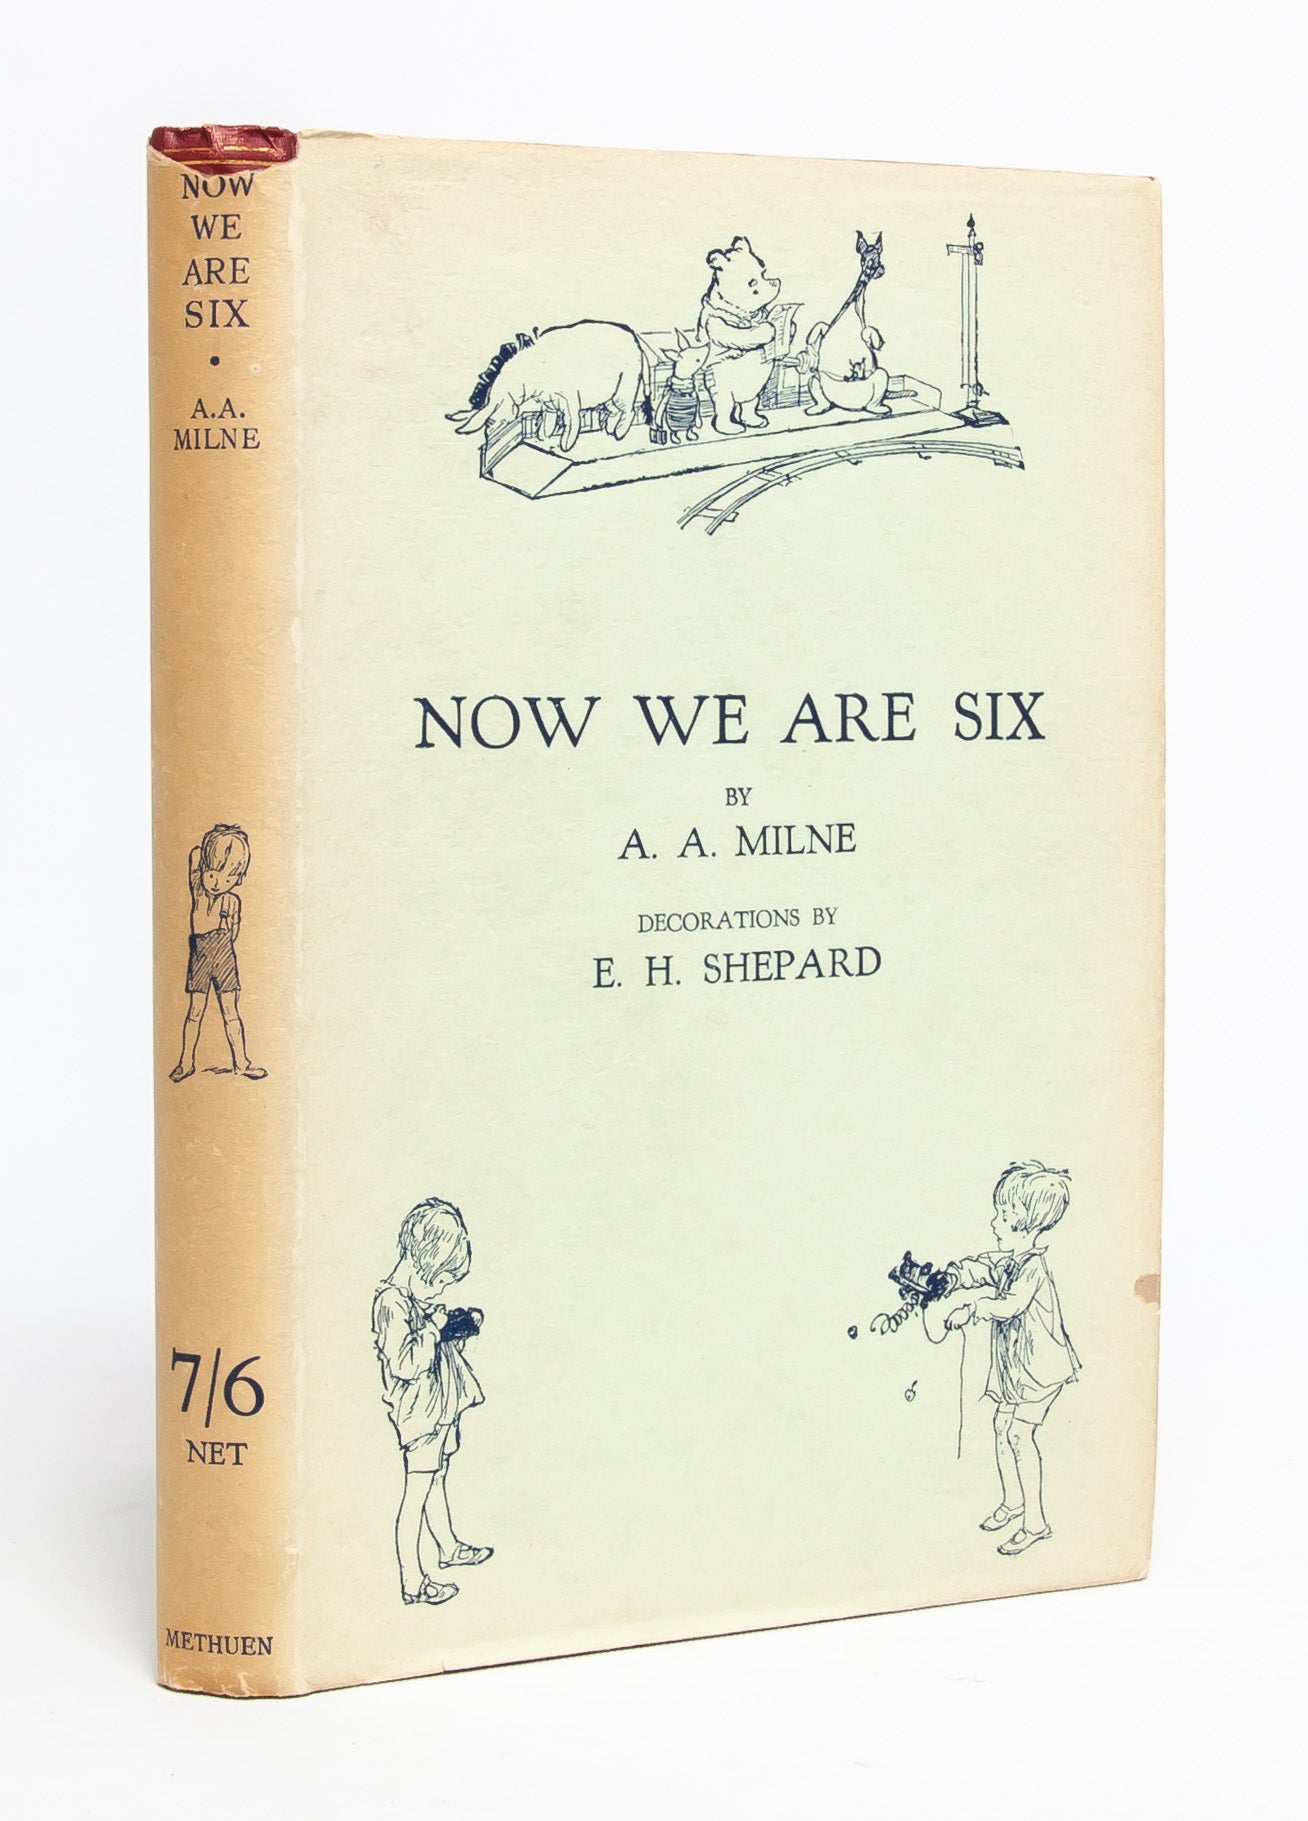 Now We Are Six by A. A. Milne, E H. Shepard on Whitmore Rare Books